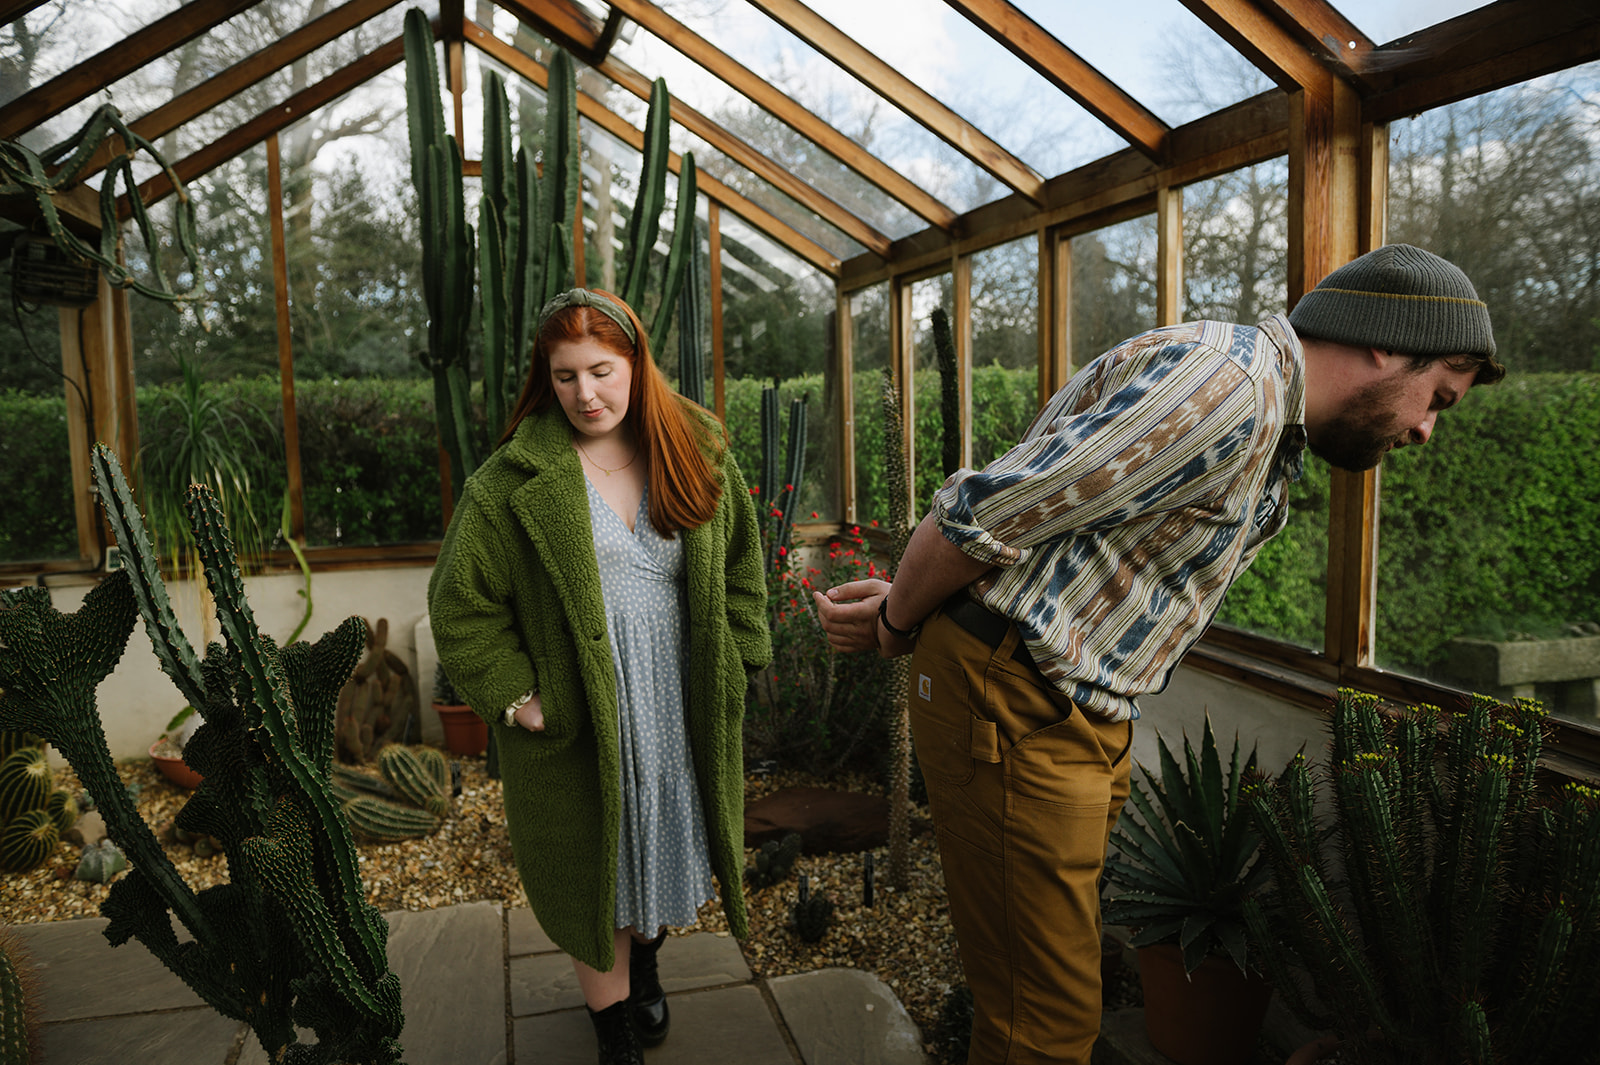 Spring engagement photo session in the cactus house at. Winterbourne House and Gardens 